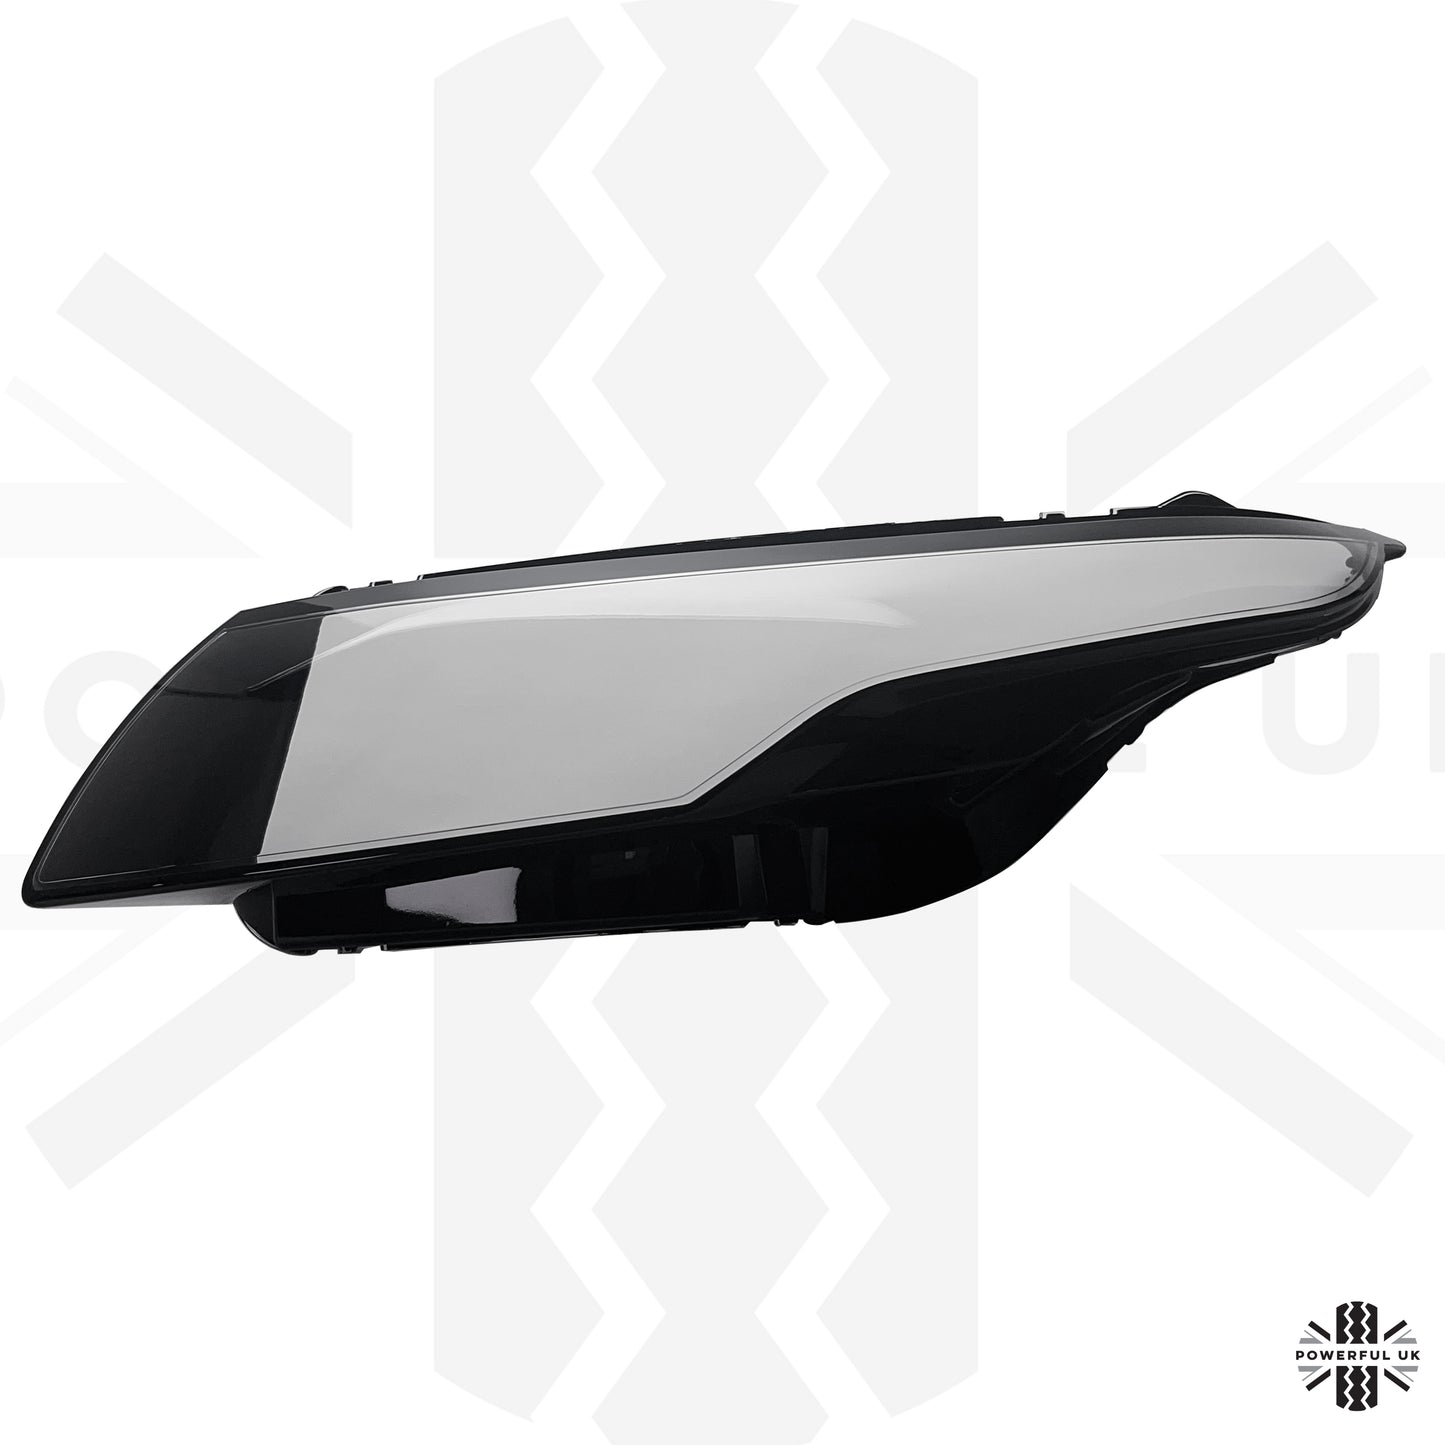 Replacement Headlight Lens for Range Rover Evoque 1 - LH